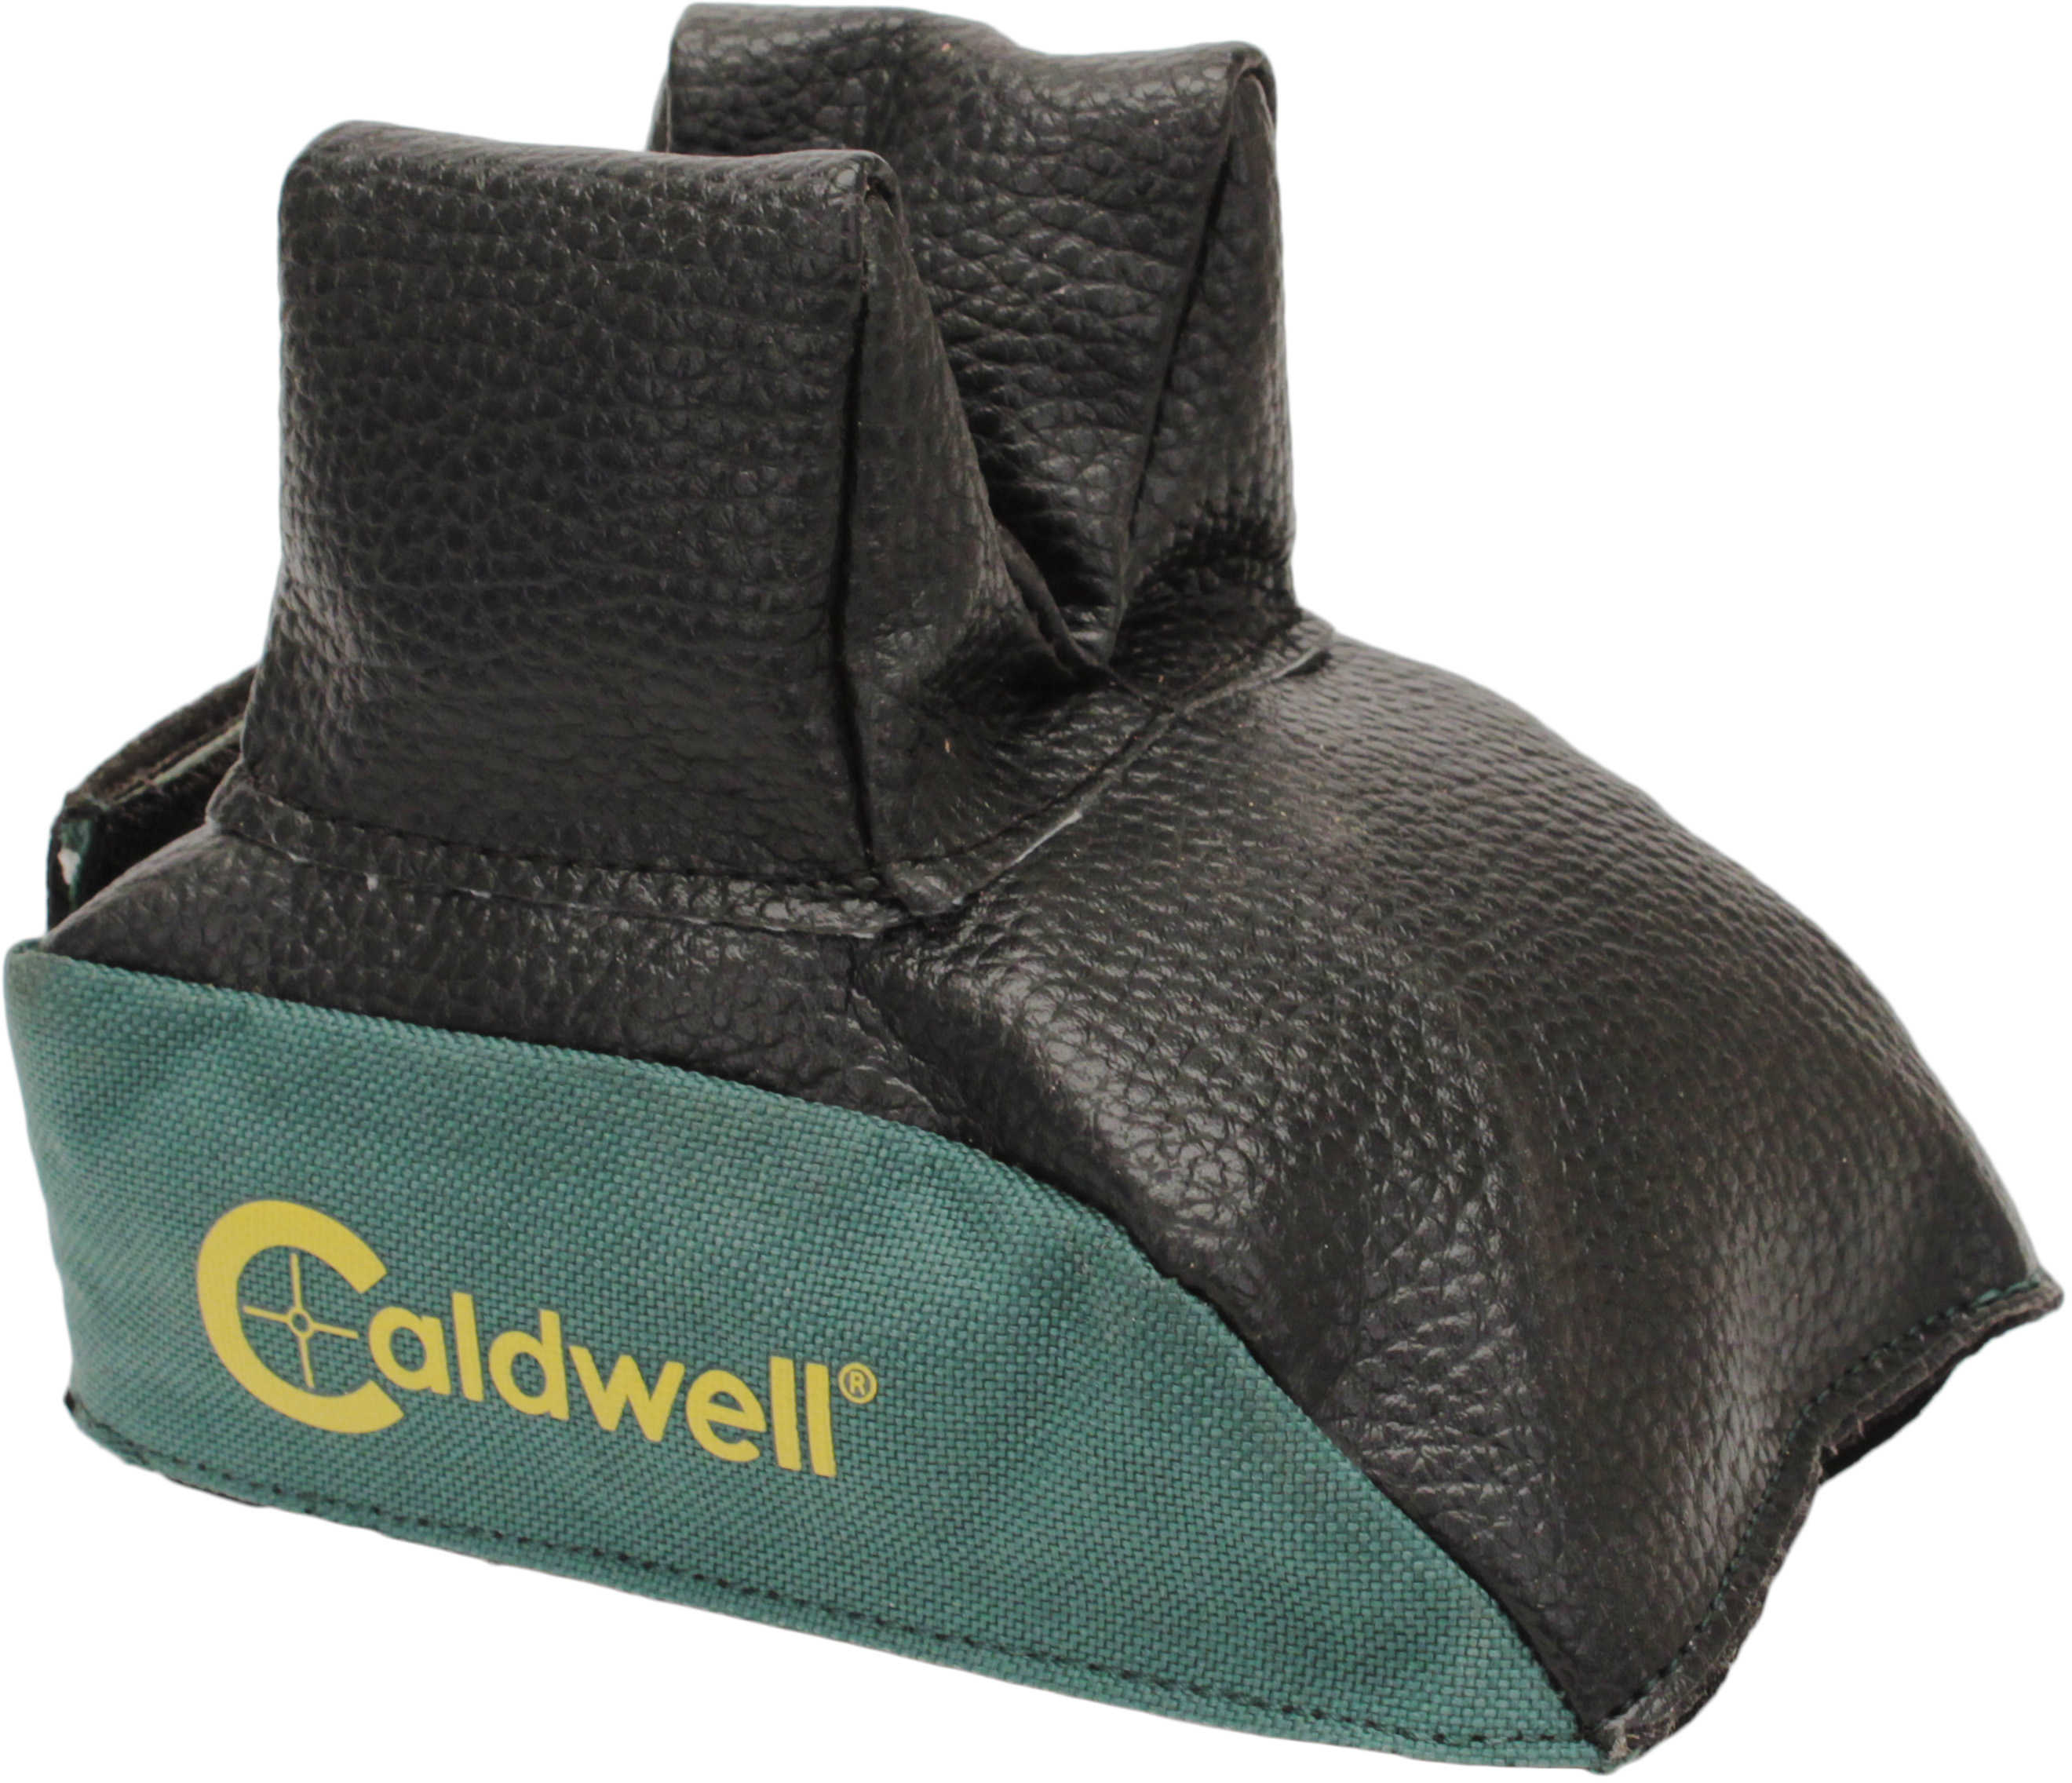 Caldwell Deluxe Shooting Bags Rear Filled 598458